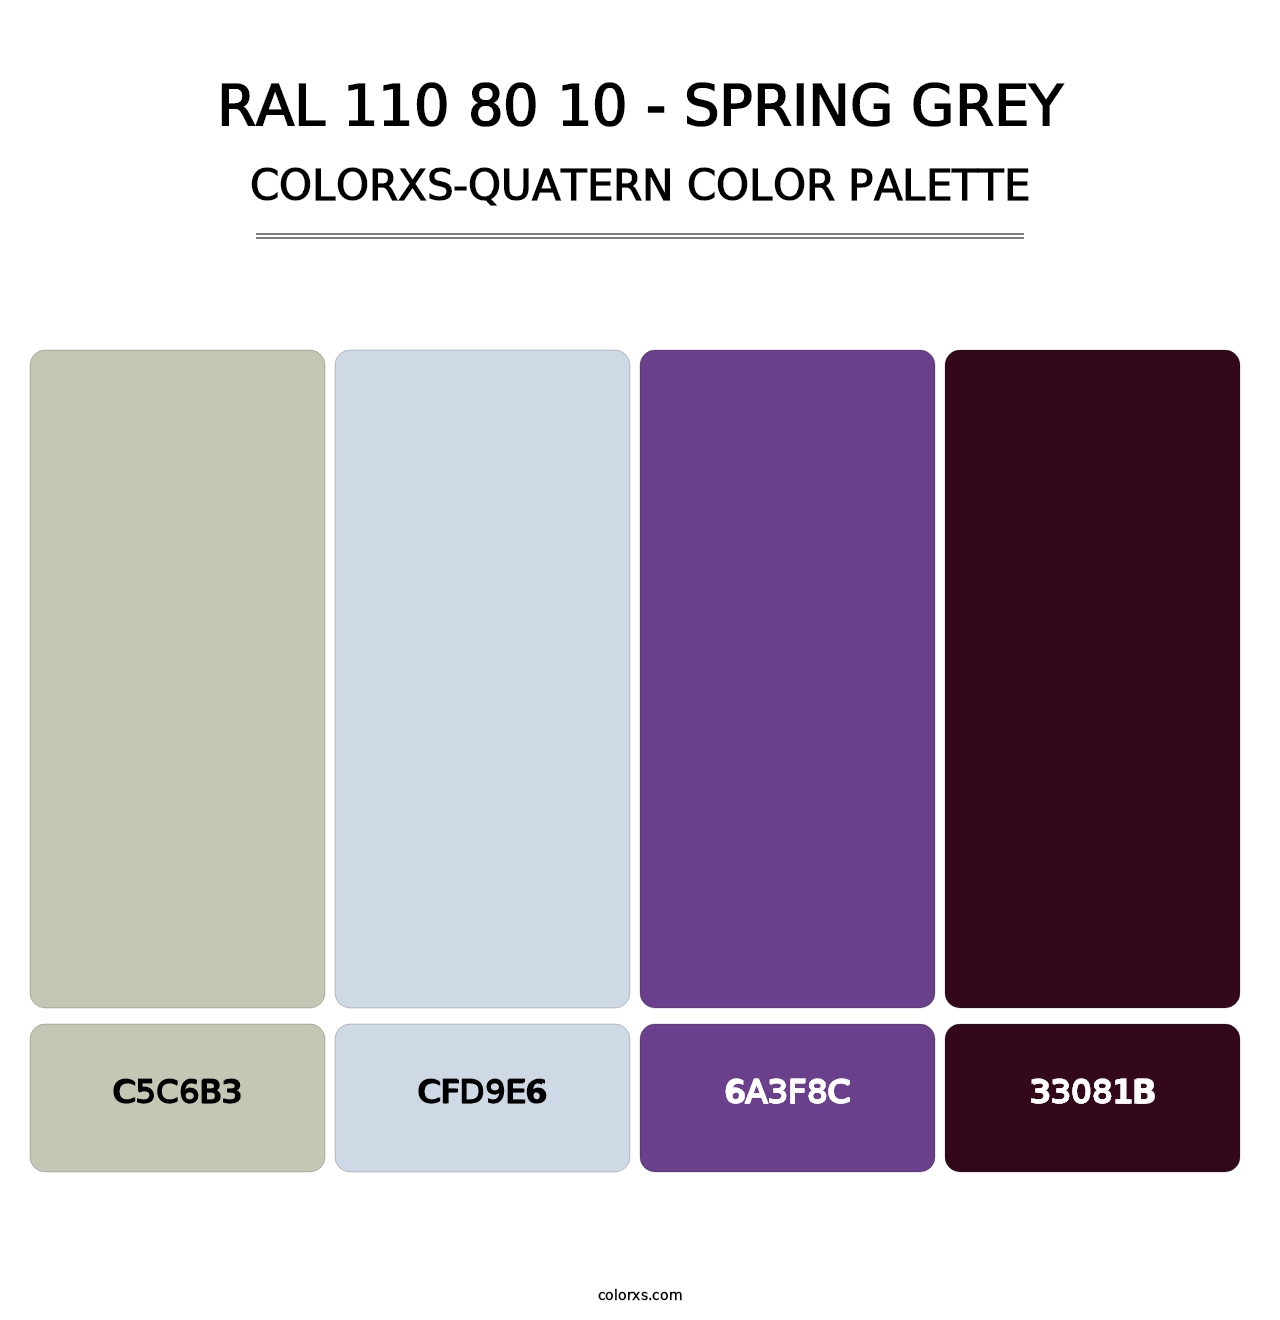 RAL 110 80 10 - Spring Grey - Colorxs Quatern Palette